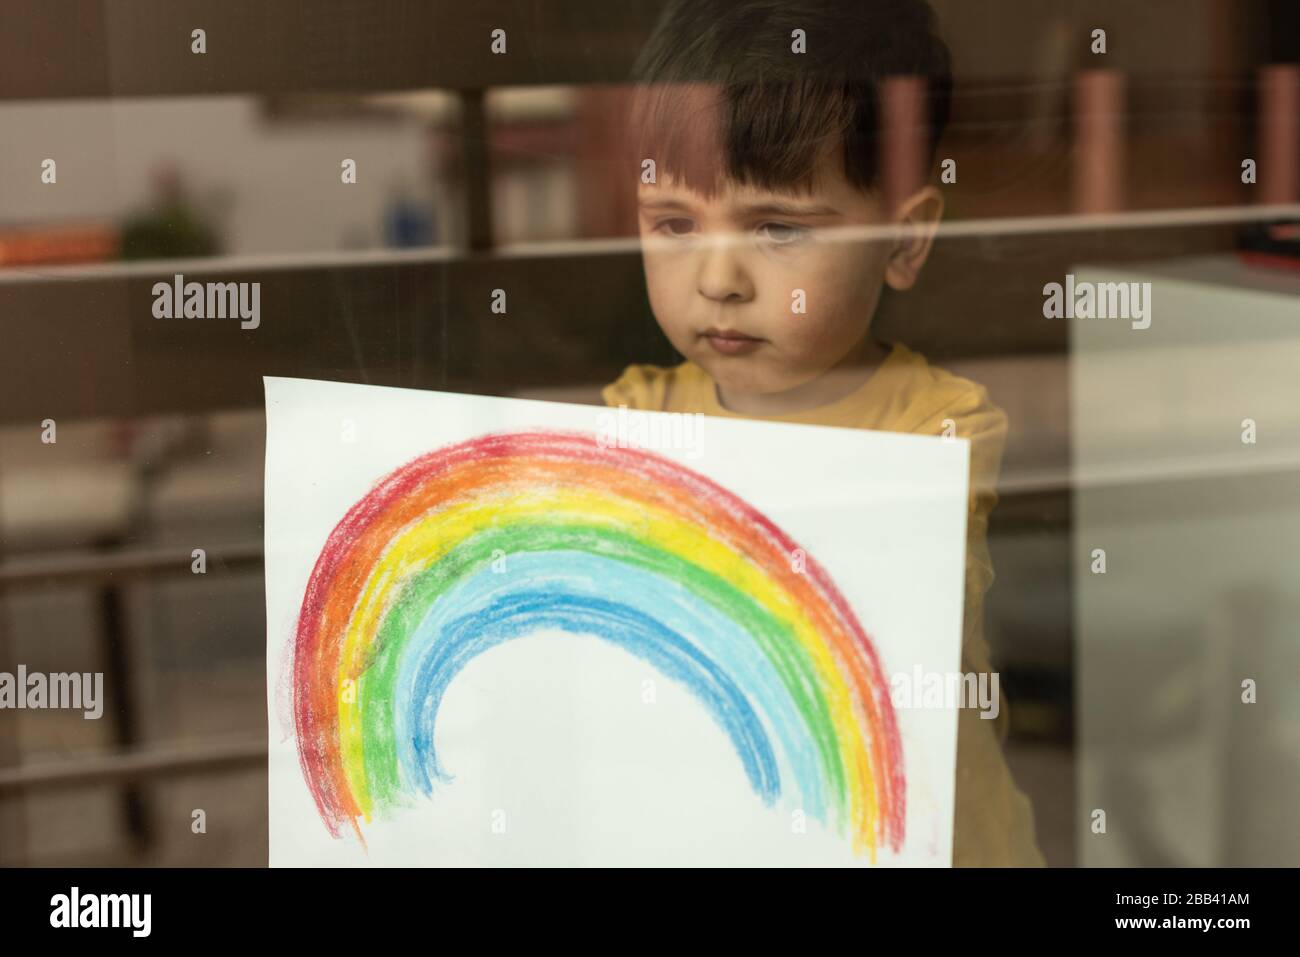 Inspirational little kid holding a drawing of a rainbow through the window Stock Photo